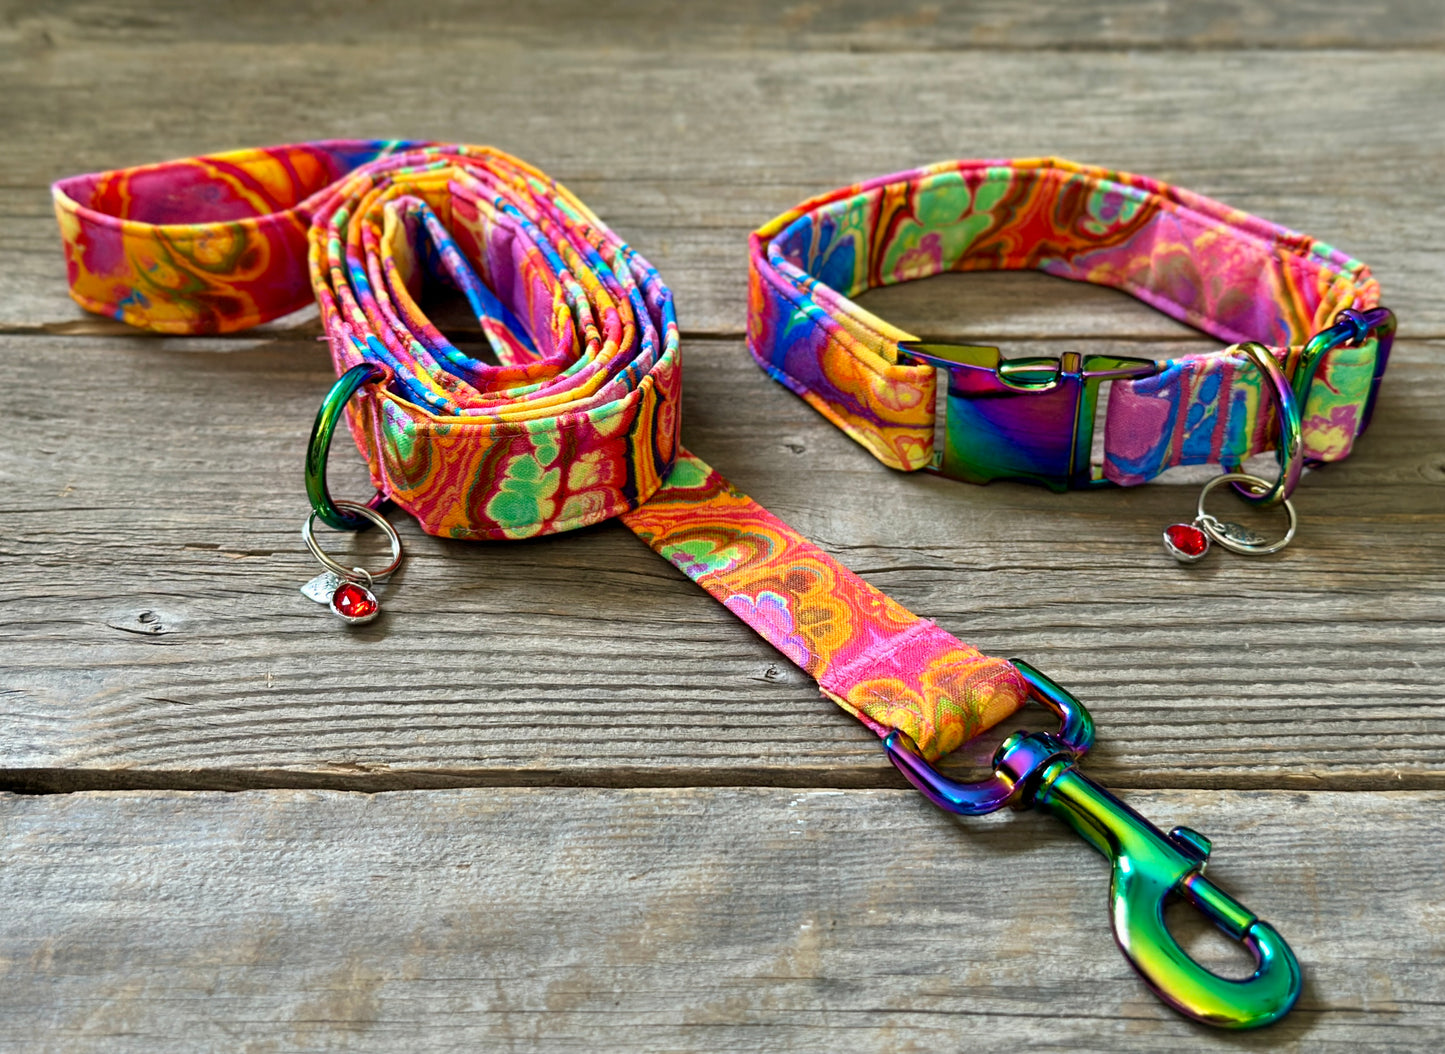 To Dye For -Dog Collar